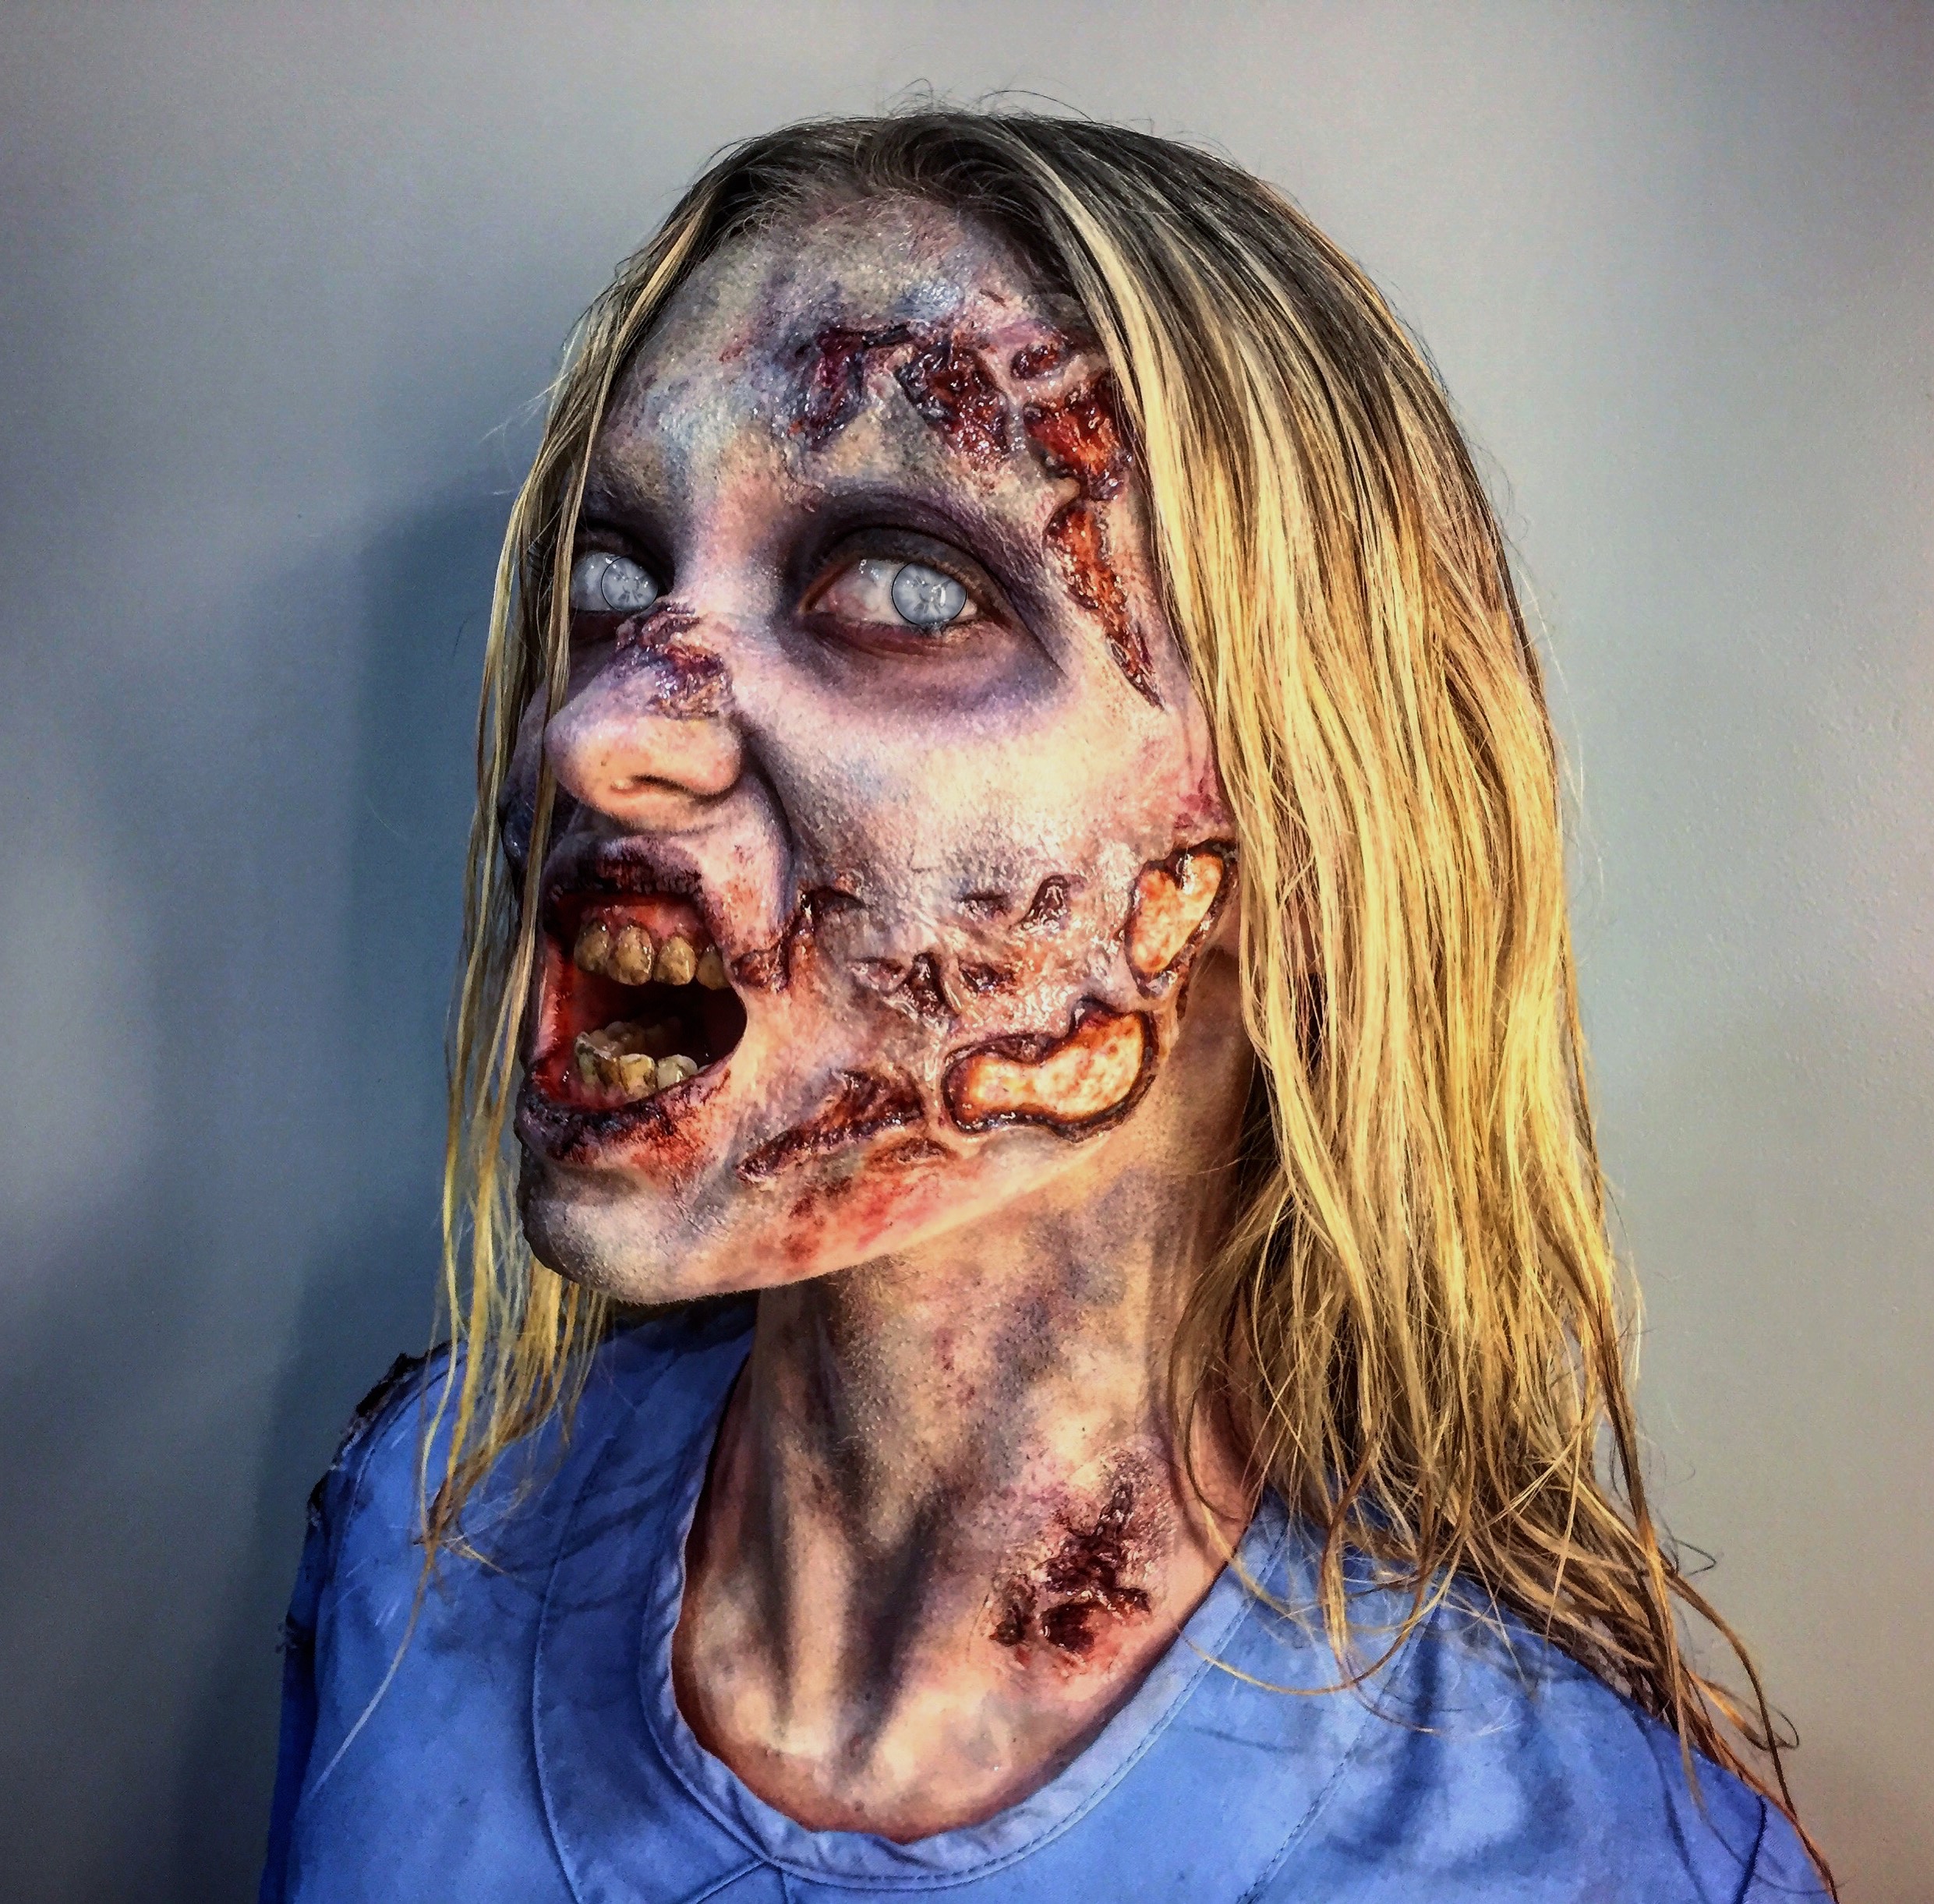  Application/Makeup by Hannah Sherer for Tinsley Transfers Merchandise/Social Media. Sculpt by Tinsley Transfers.